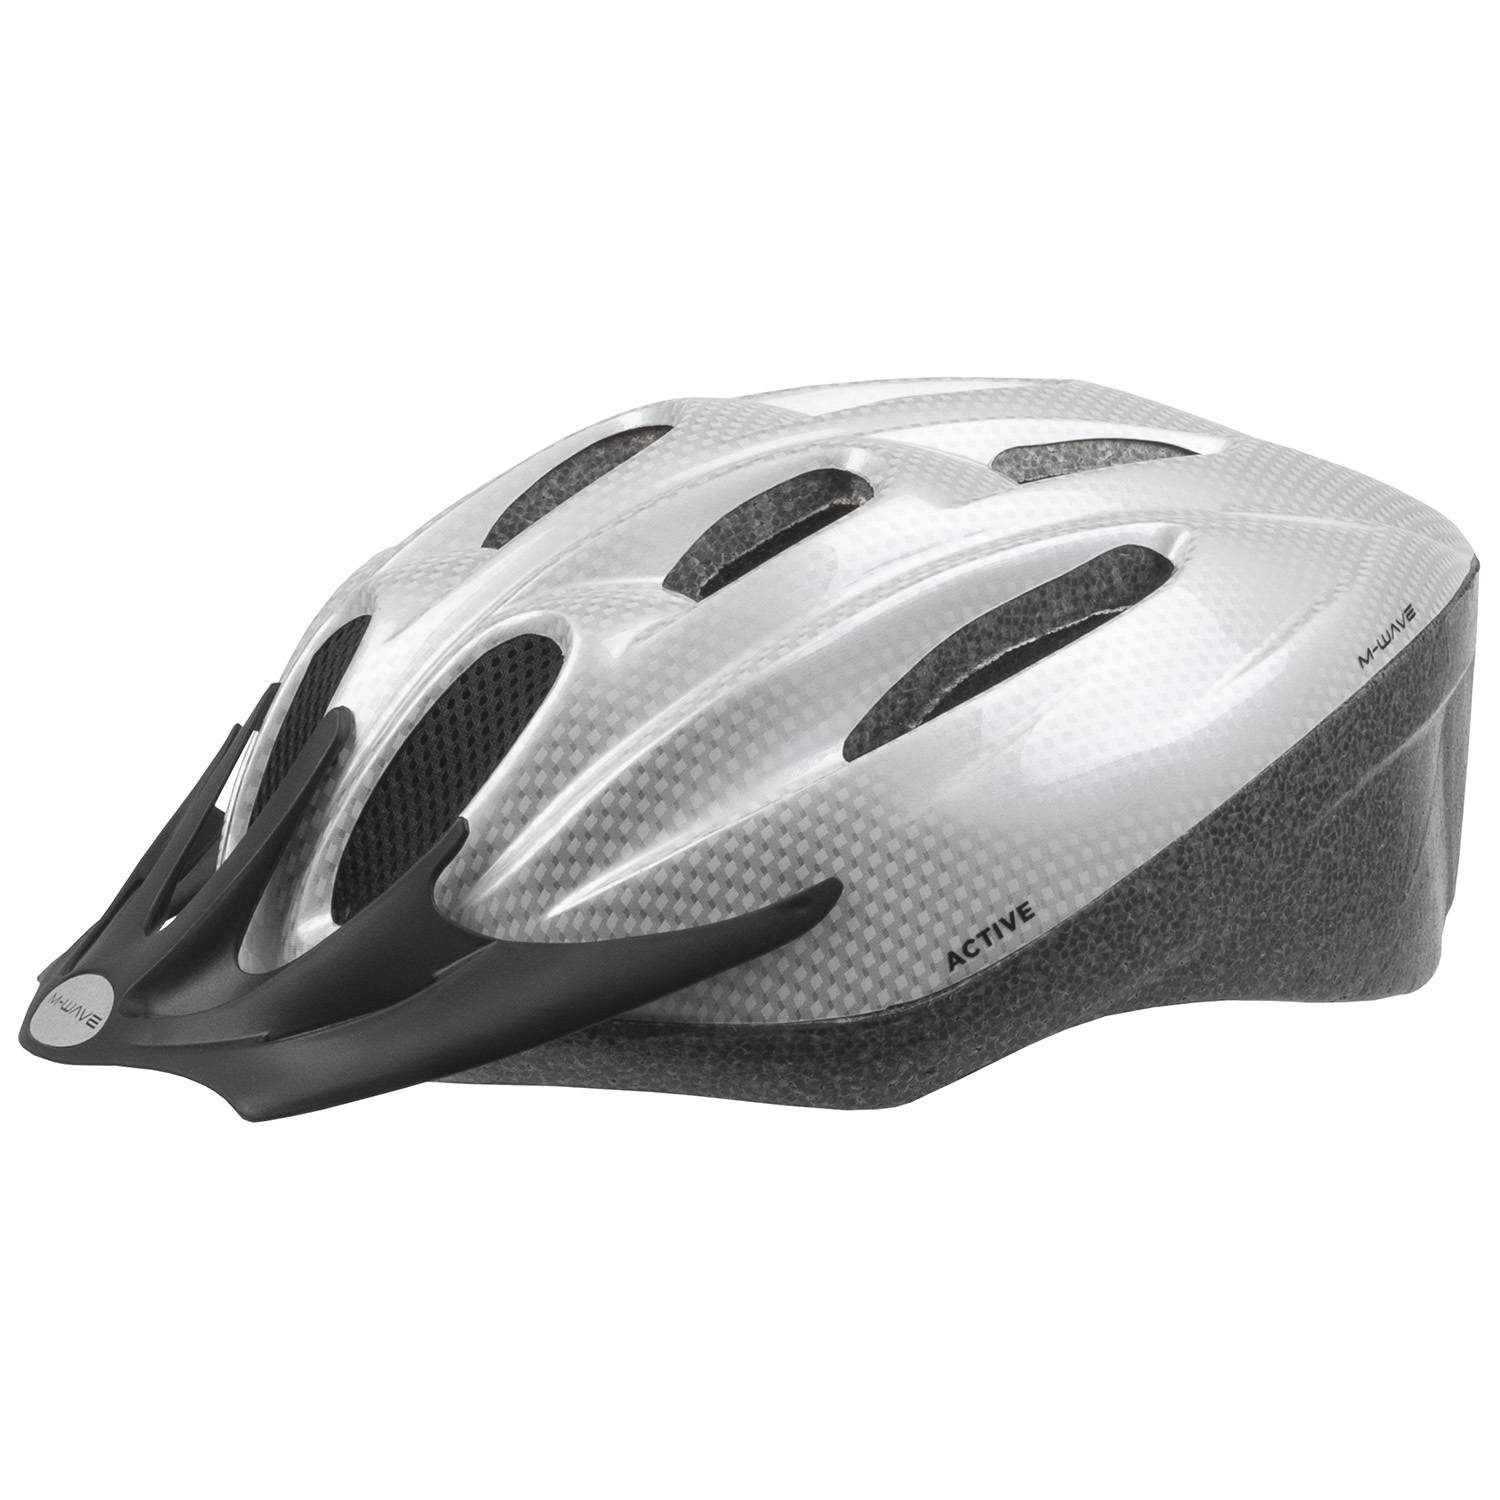 733129 M-WAVE Active bicycle helmet – AVAILABLE IN SELECTED BIKE SHOP